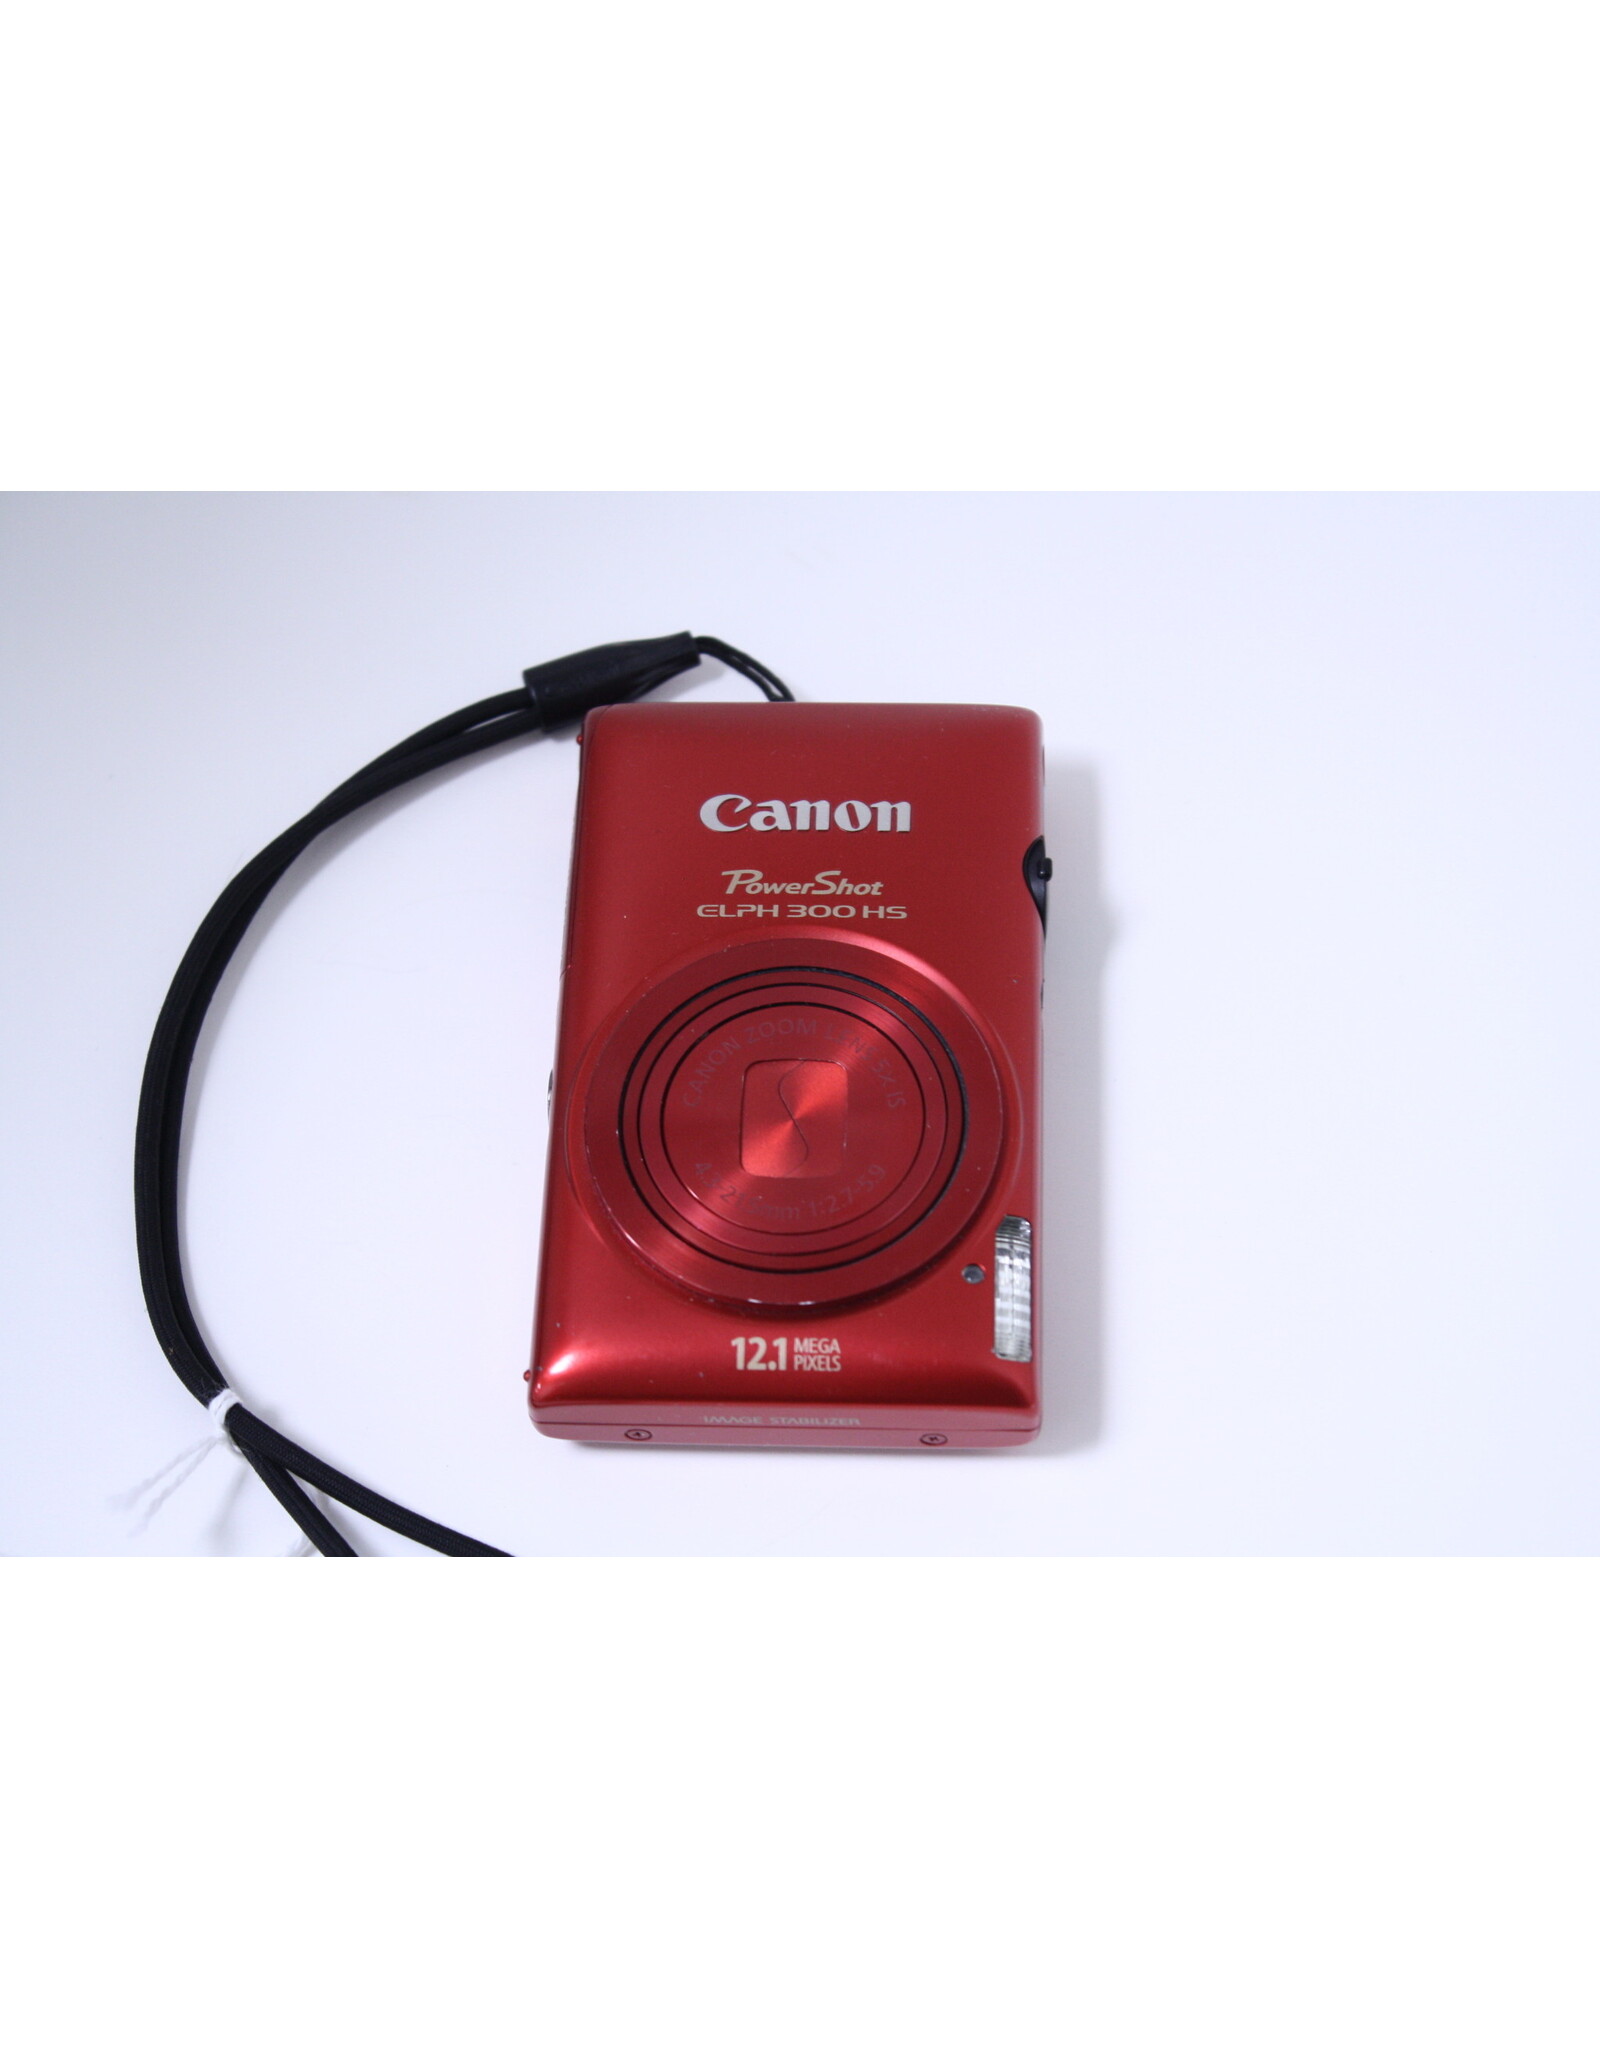 Canon PowerShot ELPH 300 HS 12.1MP 5x Digital Camera with charger, Case and battery - Red